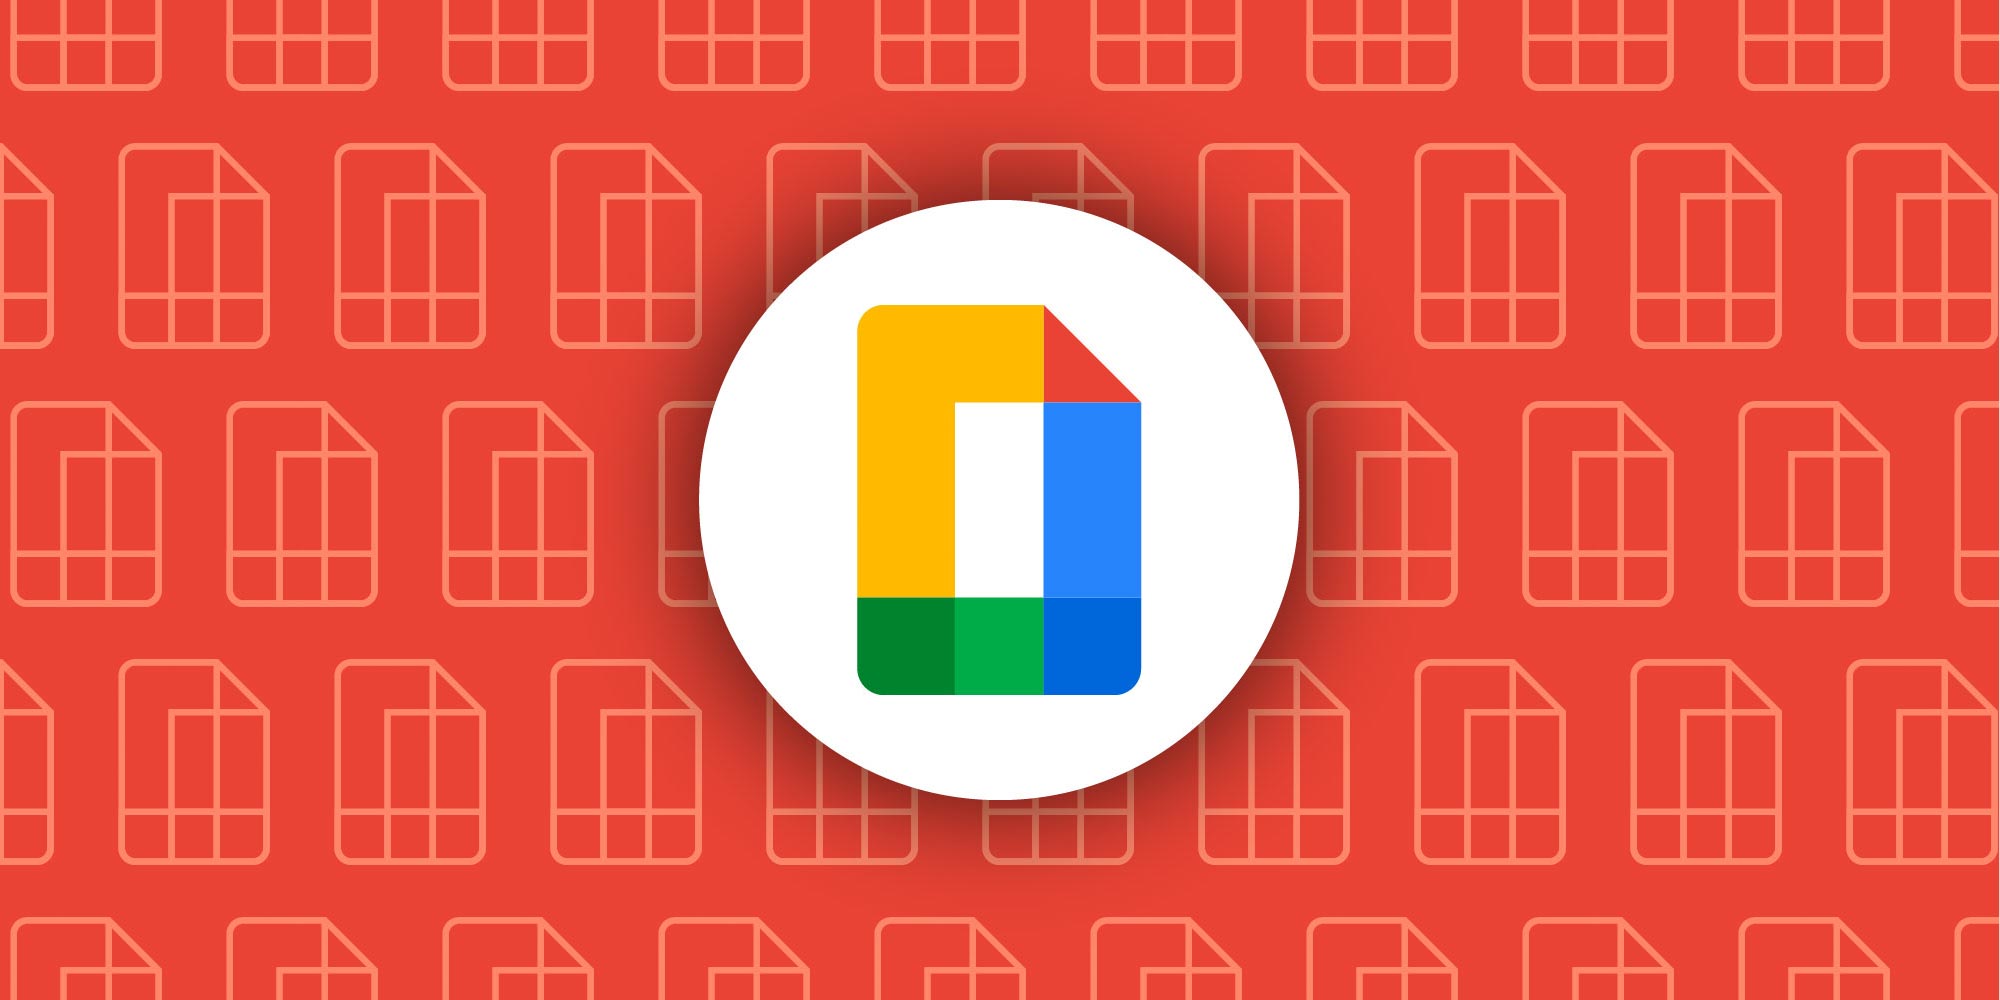 How to use collapsible headings in Google Docs